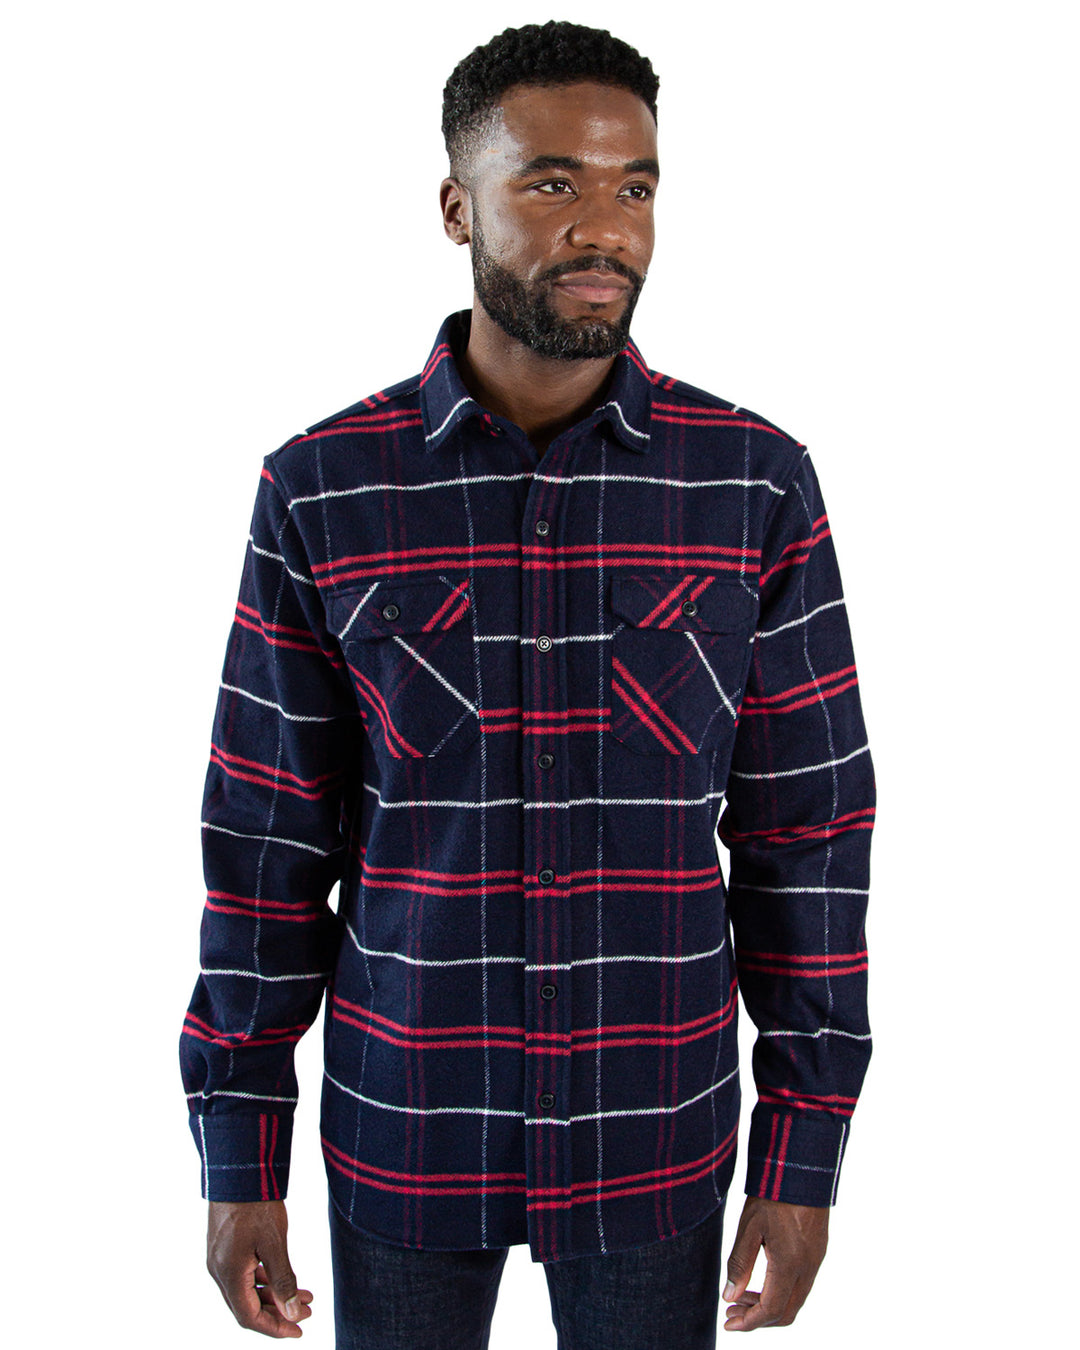 Grand Flannel in Marine Blue Plaid, 100% Cotton Flannel Shirt for Men by MuskOx